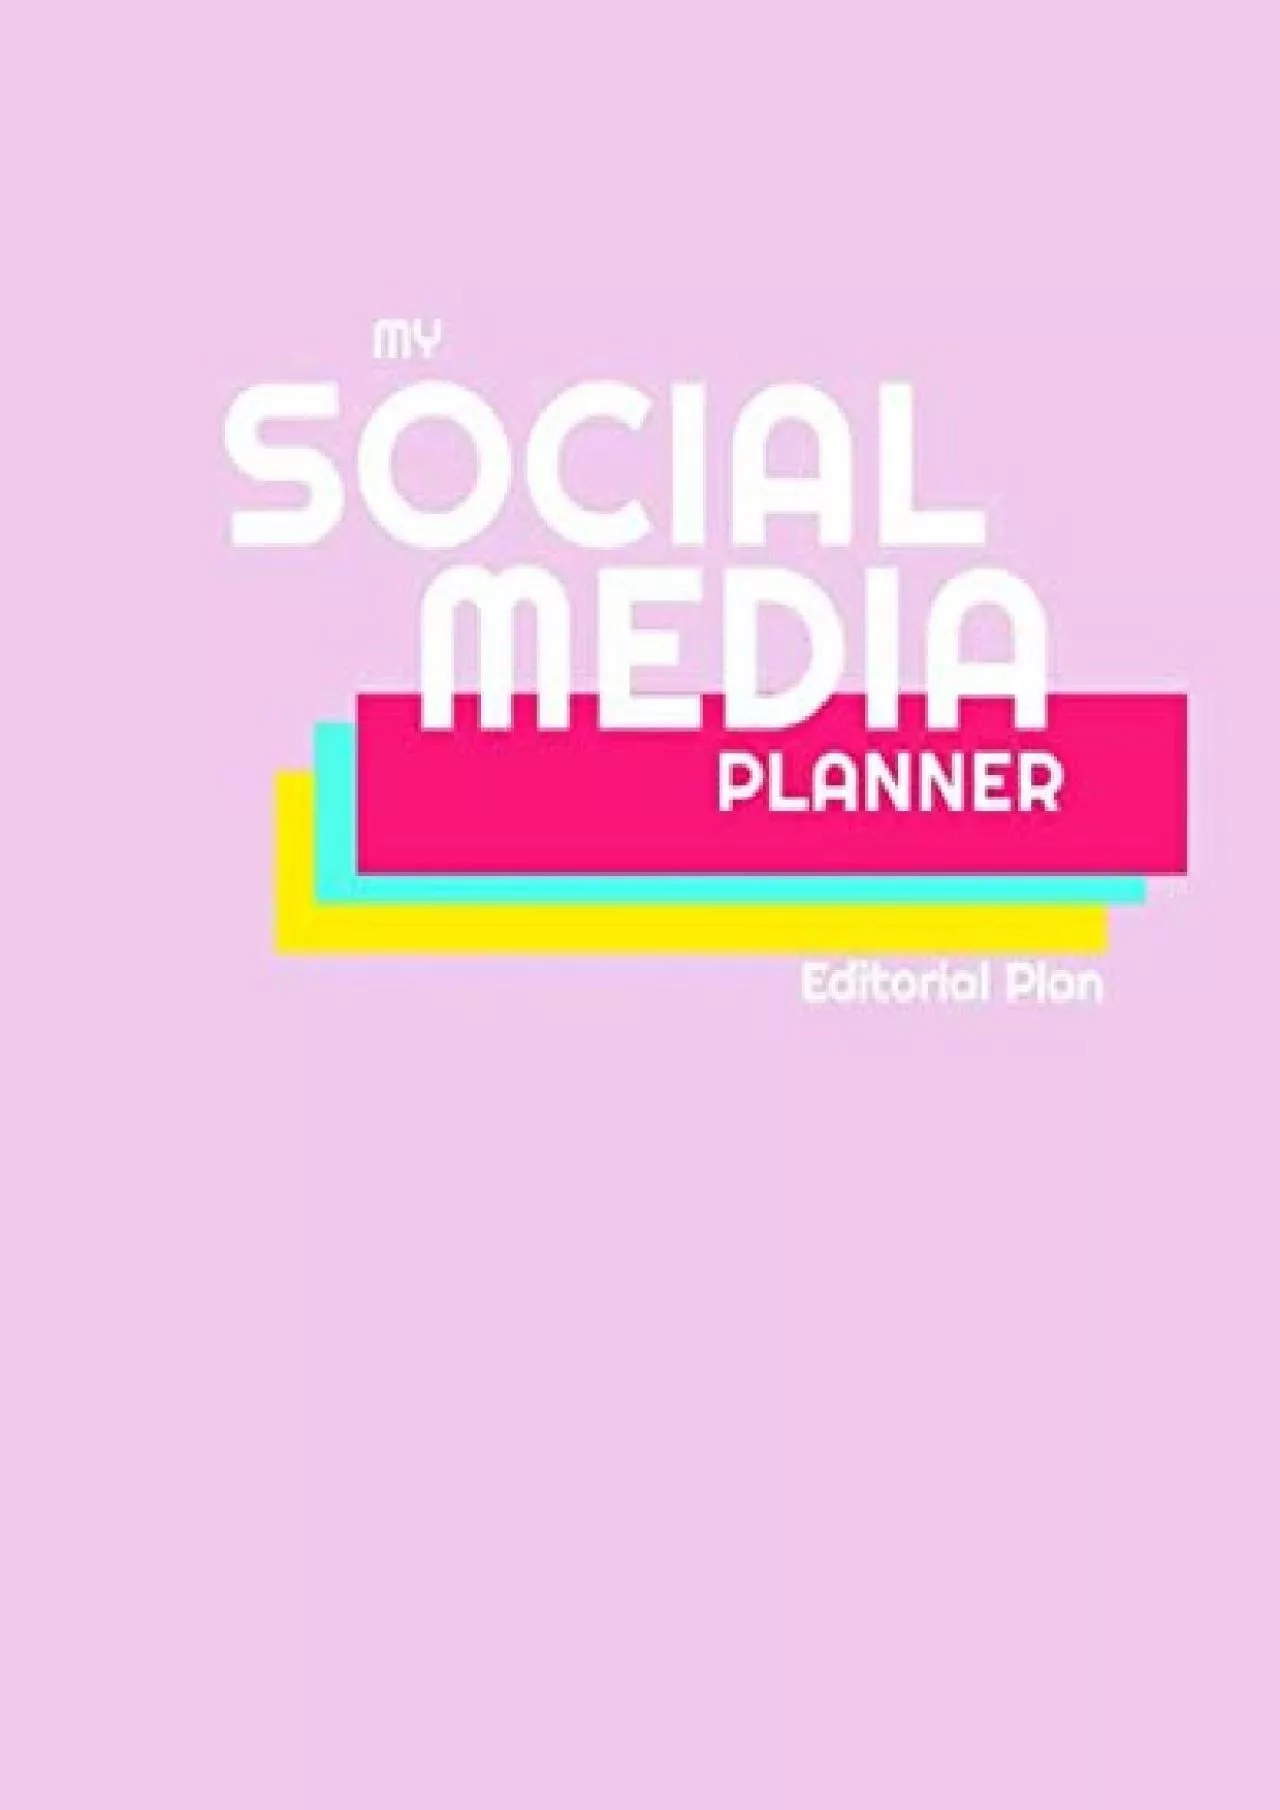 My Social Media Planner: Editorial Plan. A daily planner for your social media.